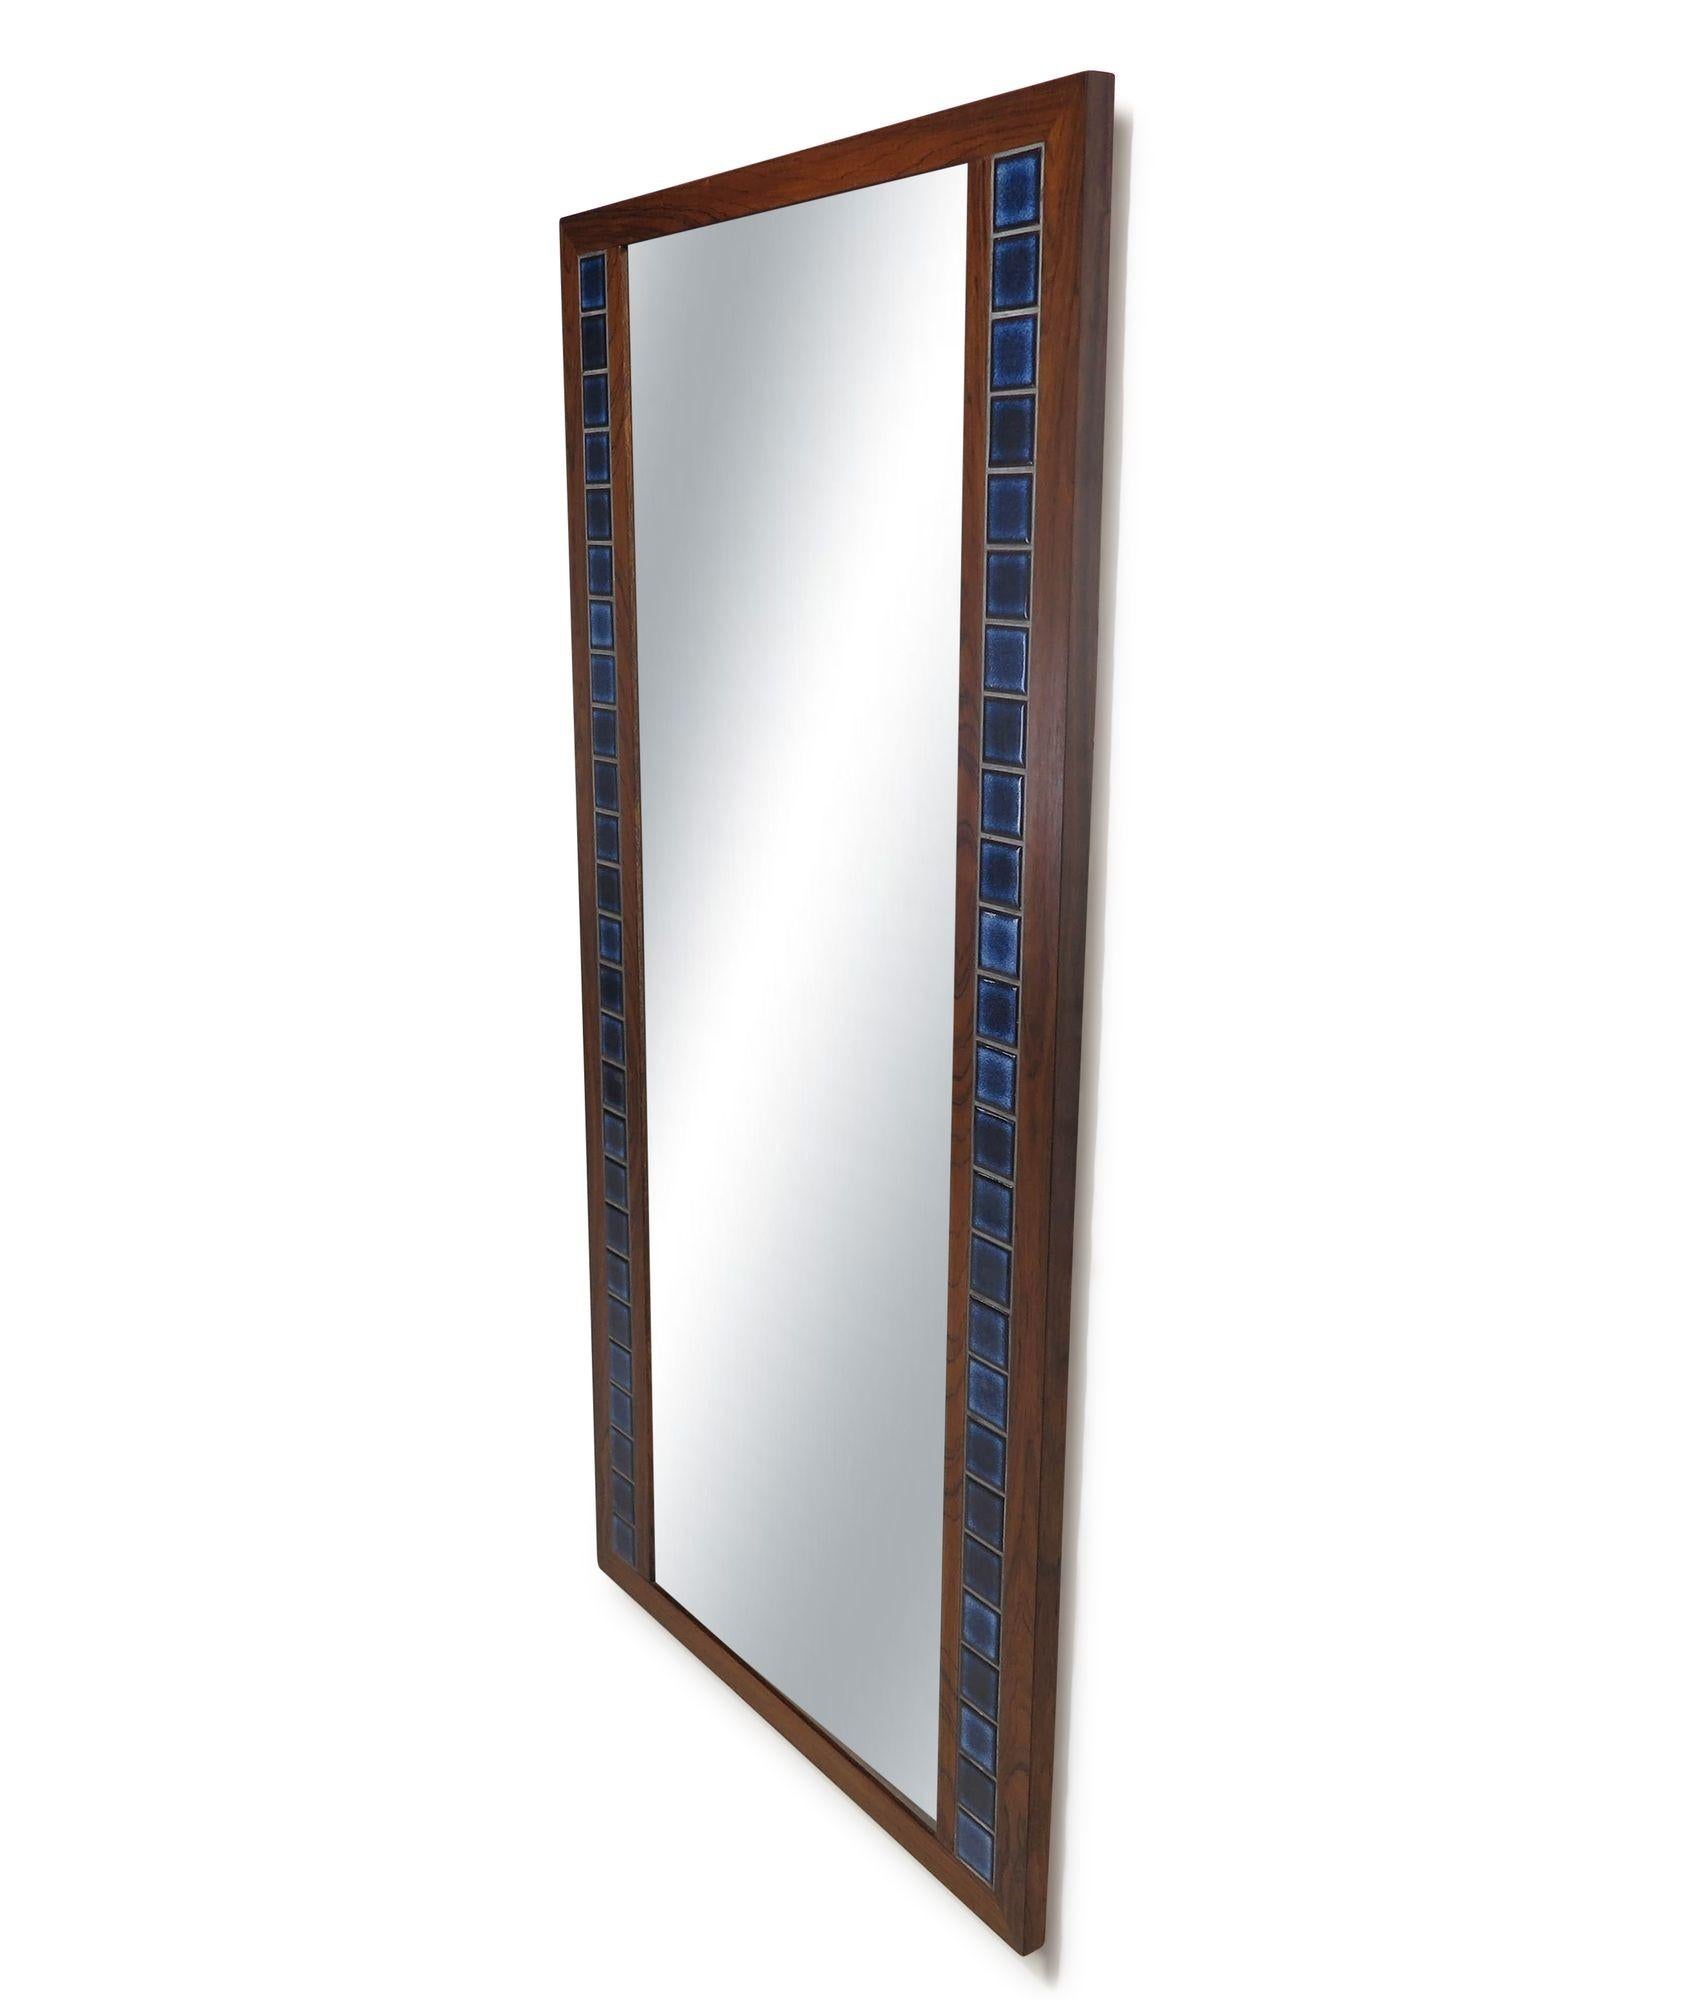 Danish Rosewood Mirror with Blue Tiles In Good Condition For Sale In Oakland, CA